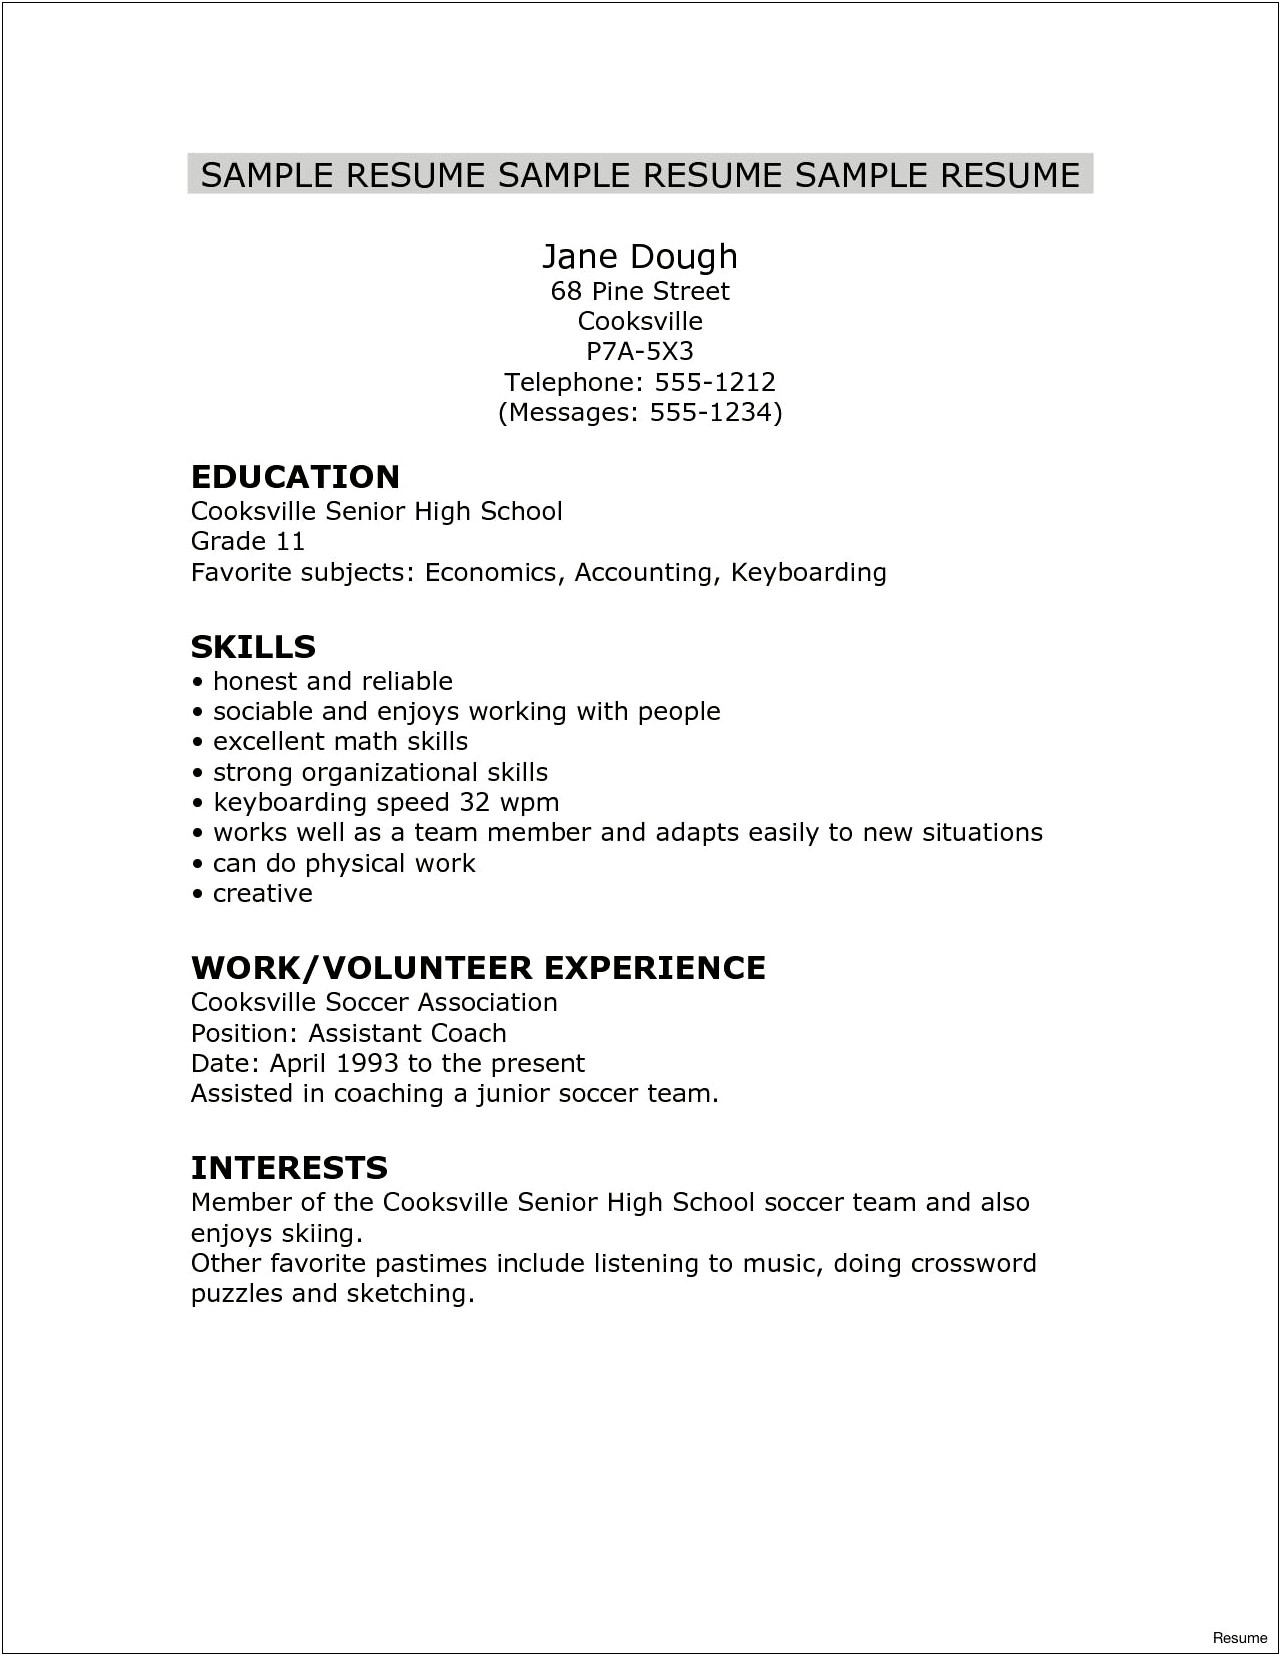 High School Student Resume For College Admission